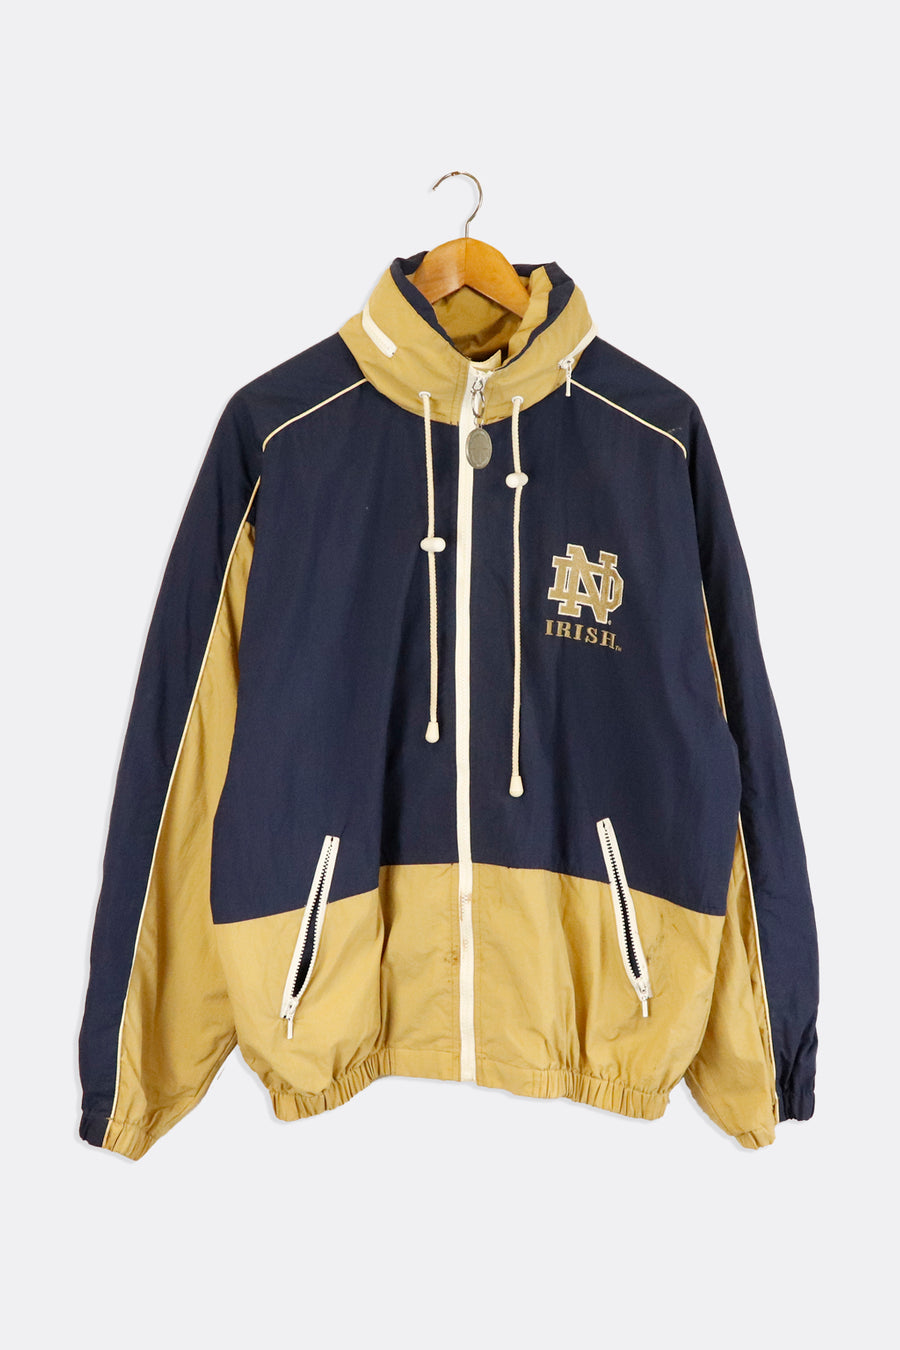 Vintage NCAA Notre Dame Fighting Irish Full Zip Removable Hood Embroidered Jacket Outerwear Sz M